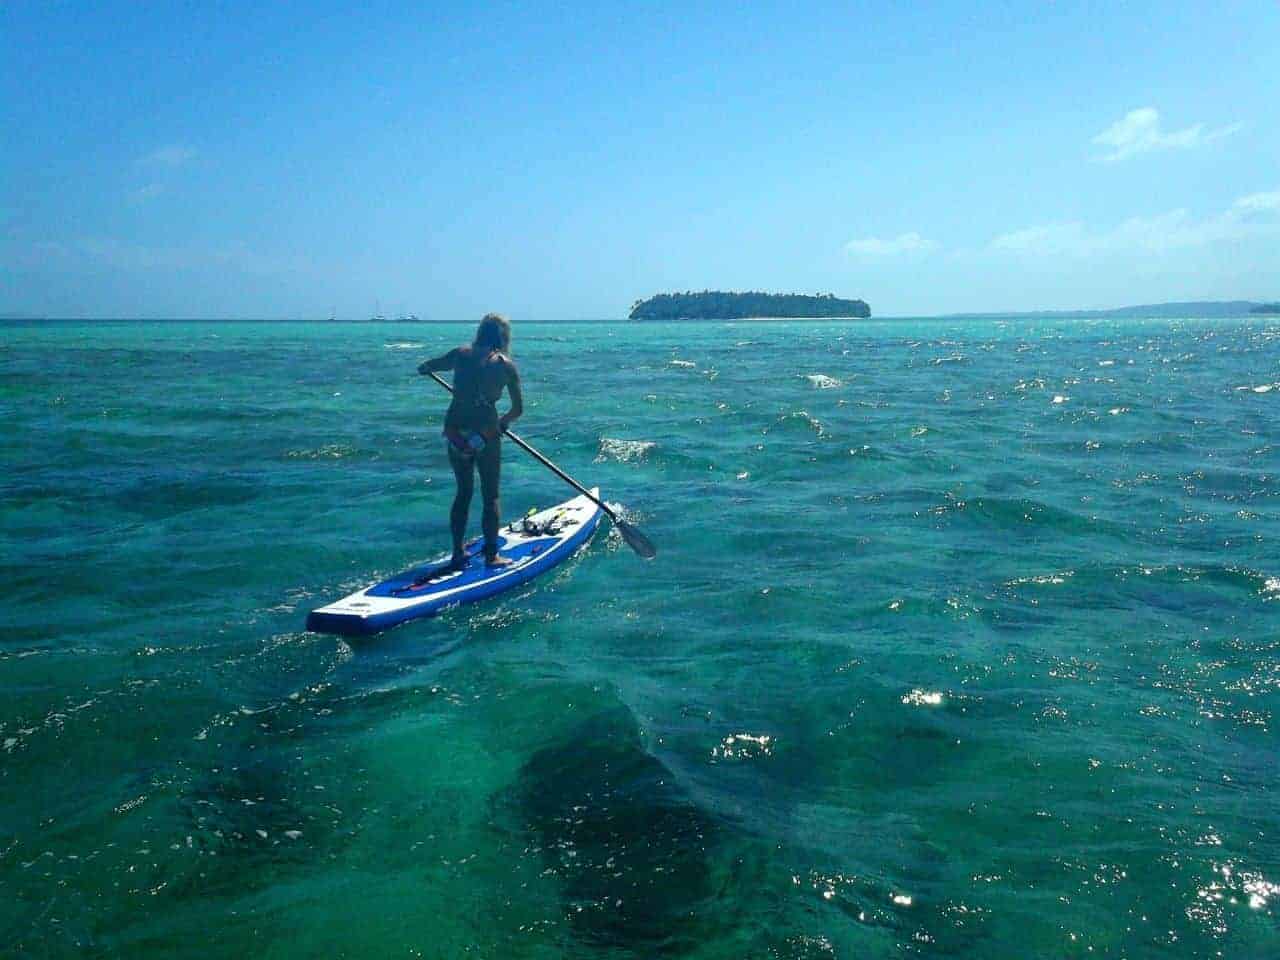 Mandy paddling to one of the island on the mistral inflatable sup